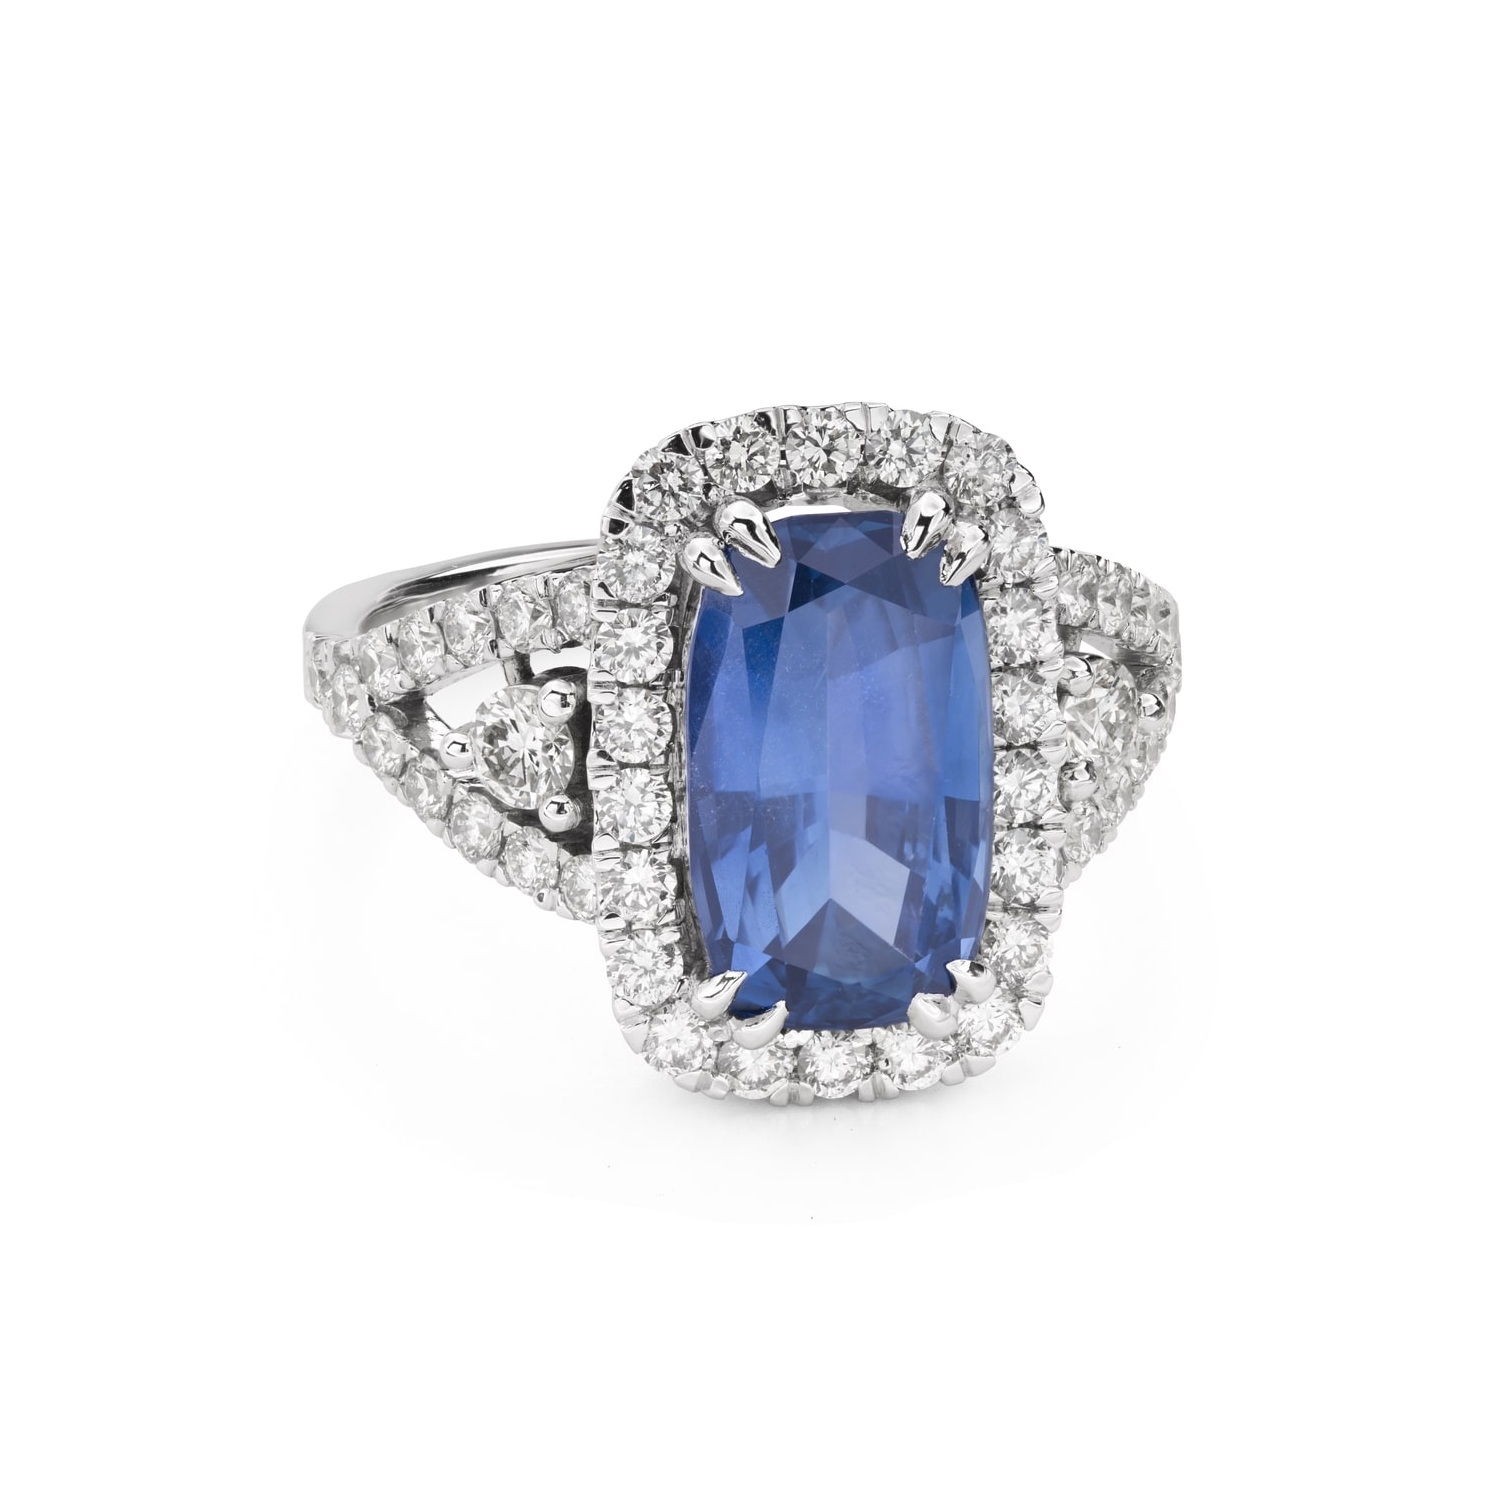 Engagement ring with gemstones "Sapphire 36"